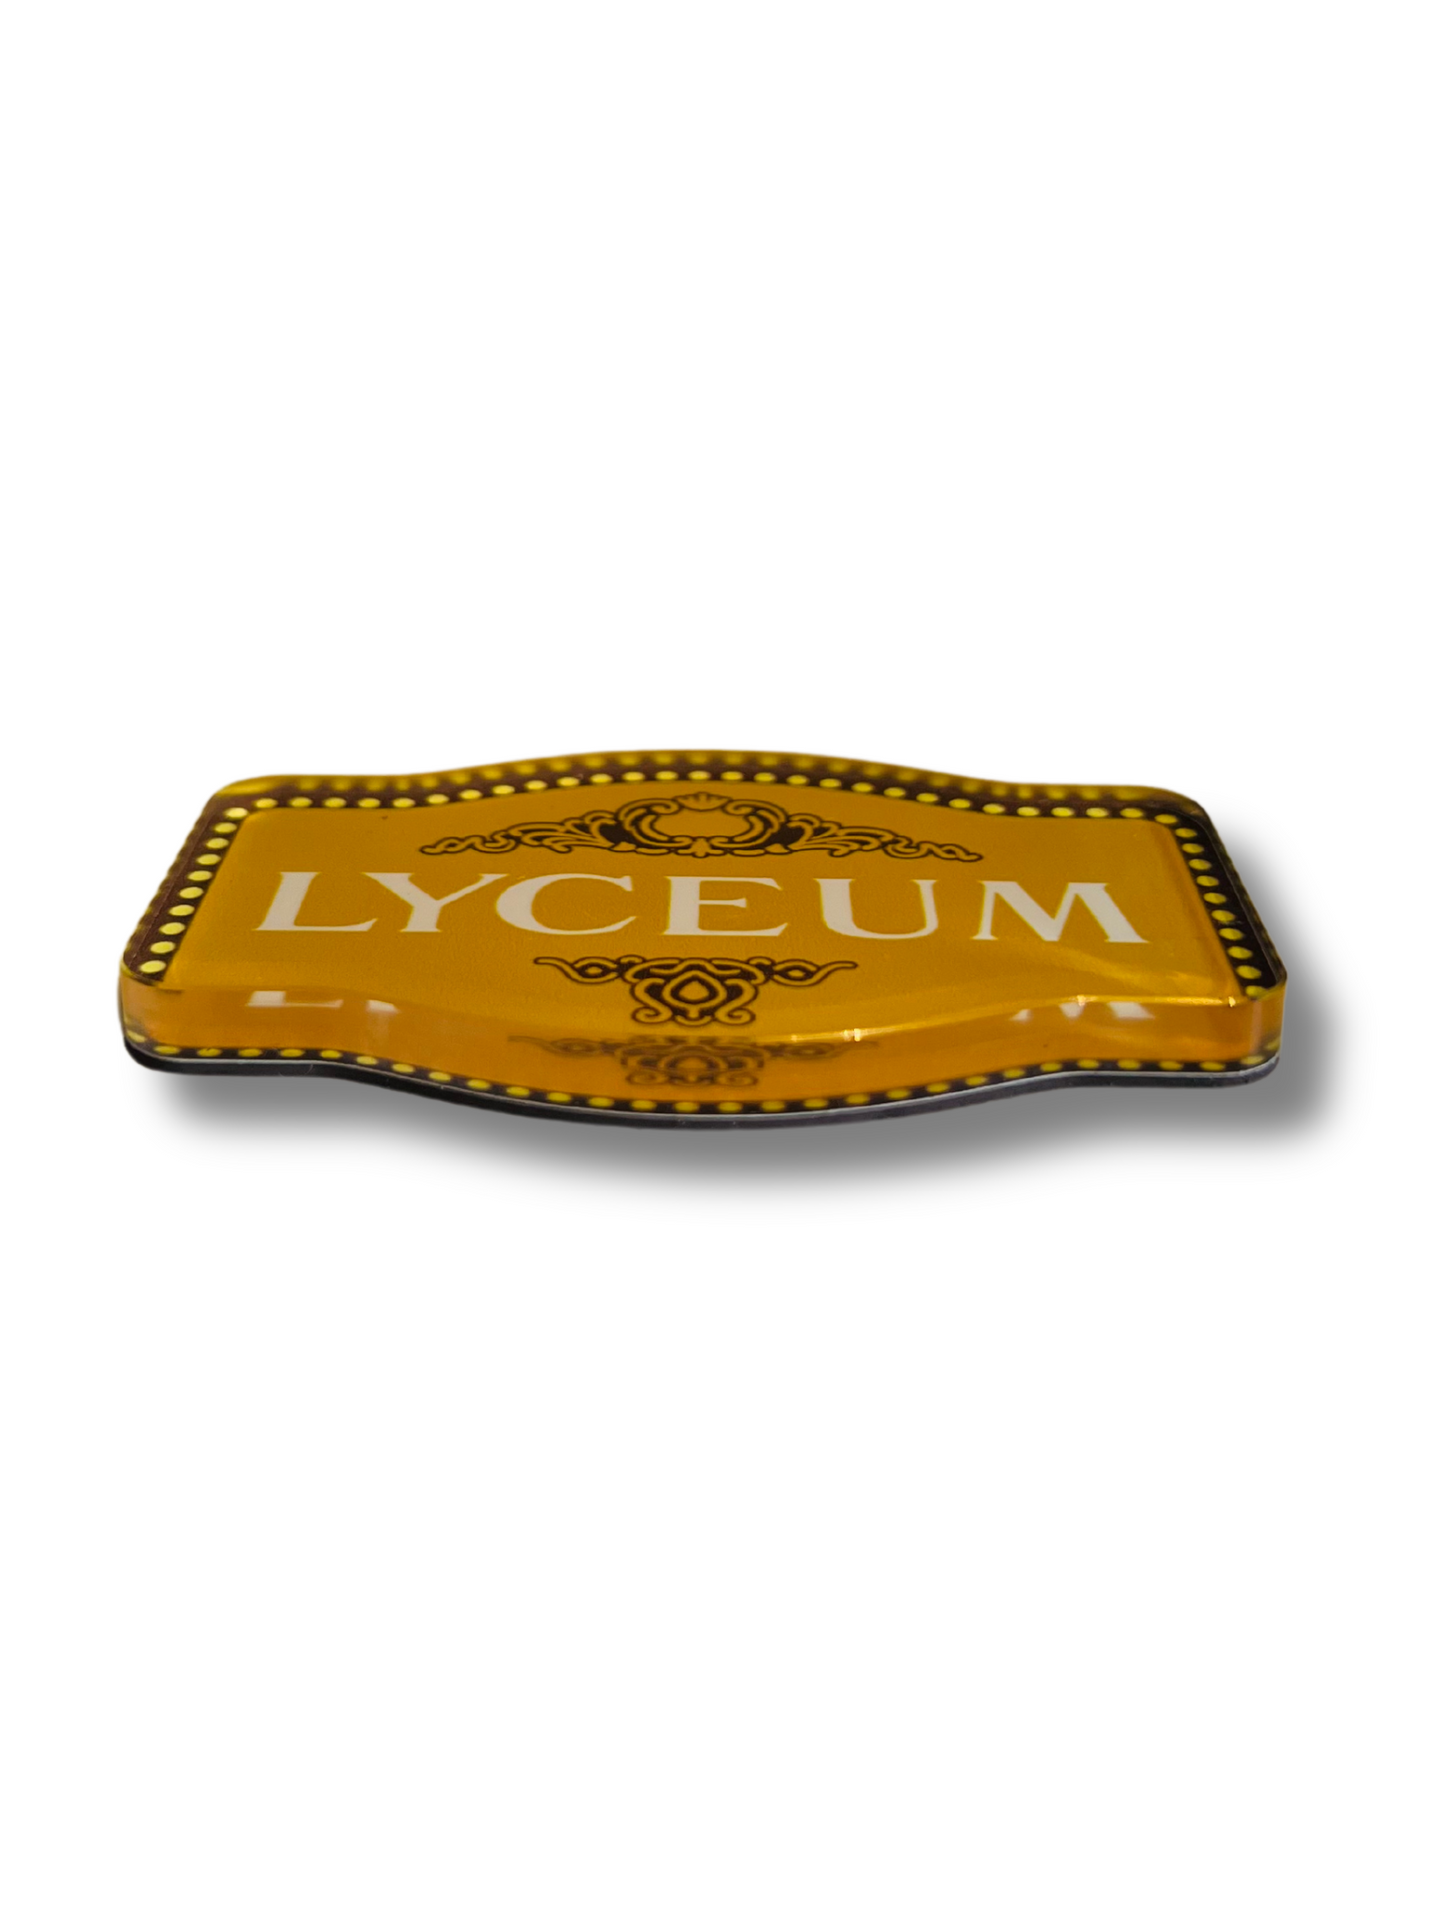 Lyceum Marquee Acrylic Magnet